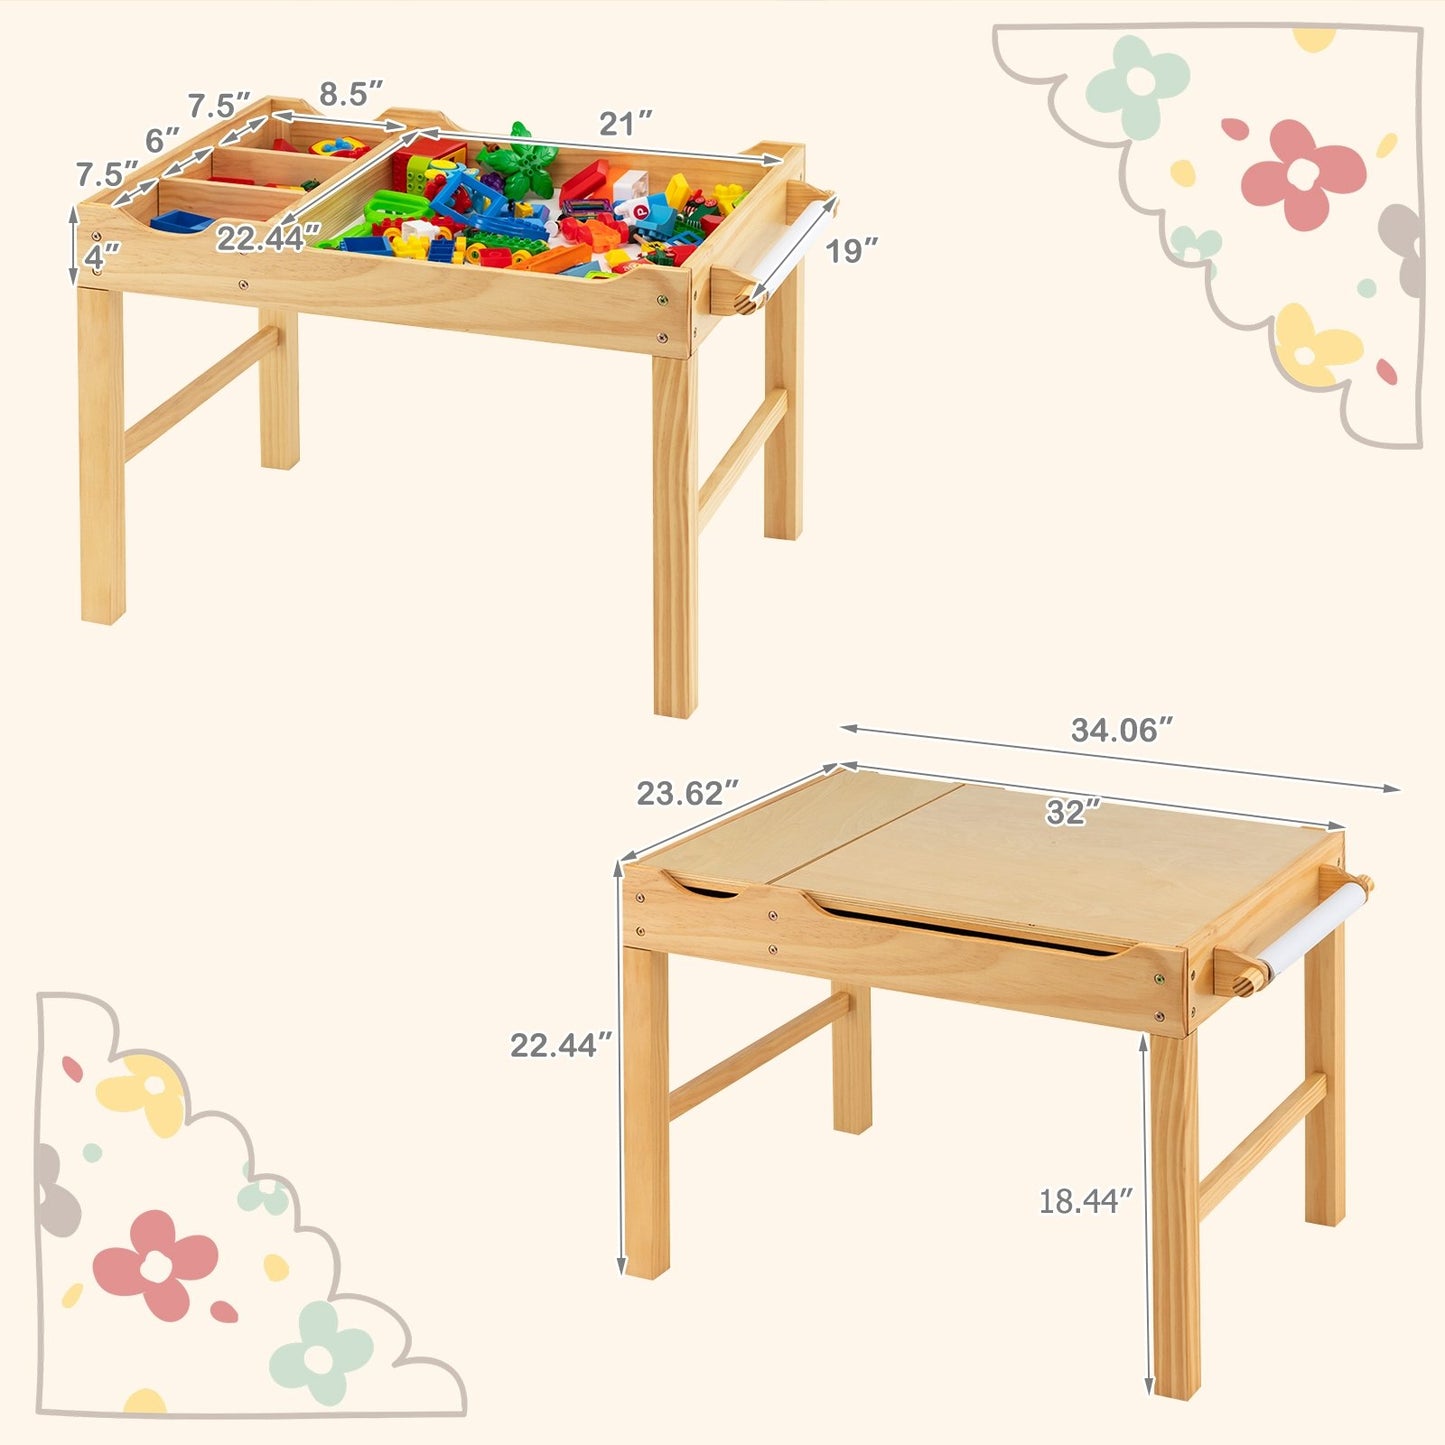 Kids Multi Activity Play Table Wooden Building Block Desk with Storage Paper Roll, Natural